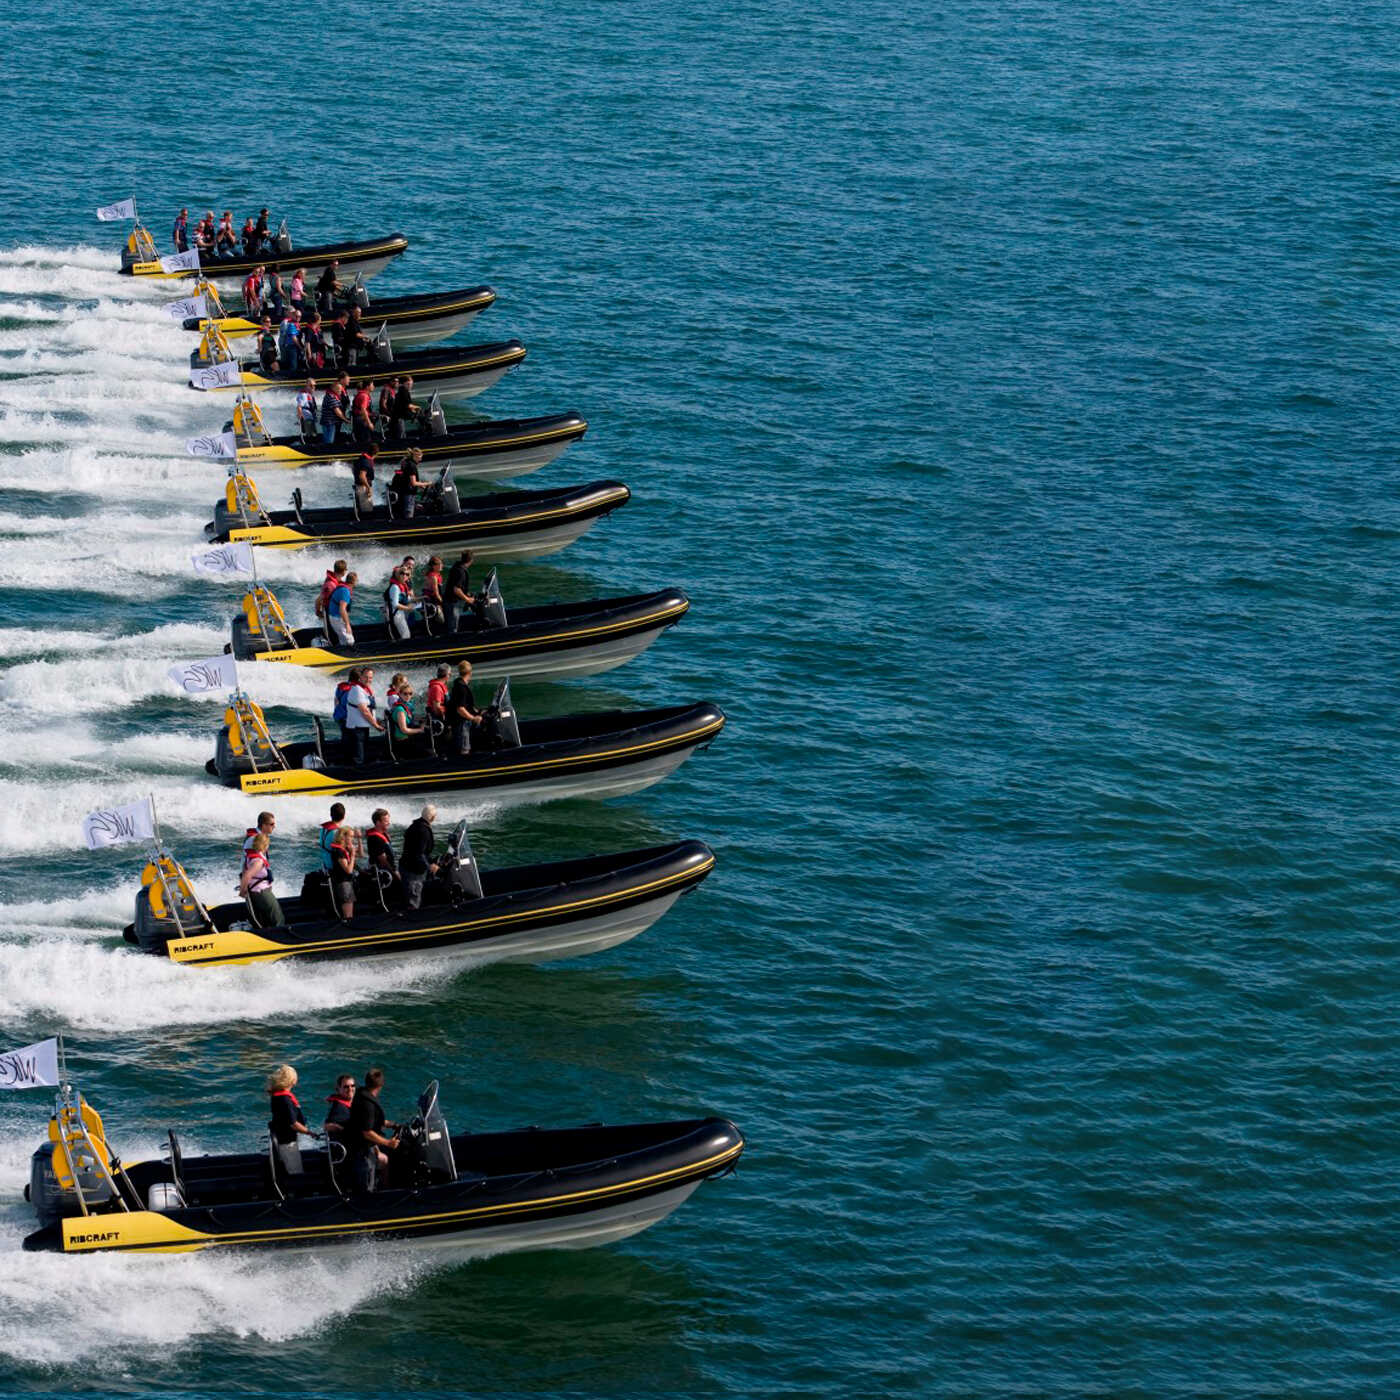 Solent Rib Rides Team Building Events Corporate Away Days Pylewell Park New Forest Hampshire